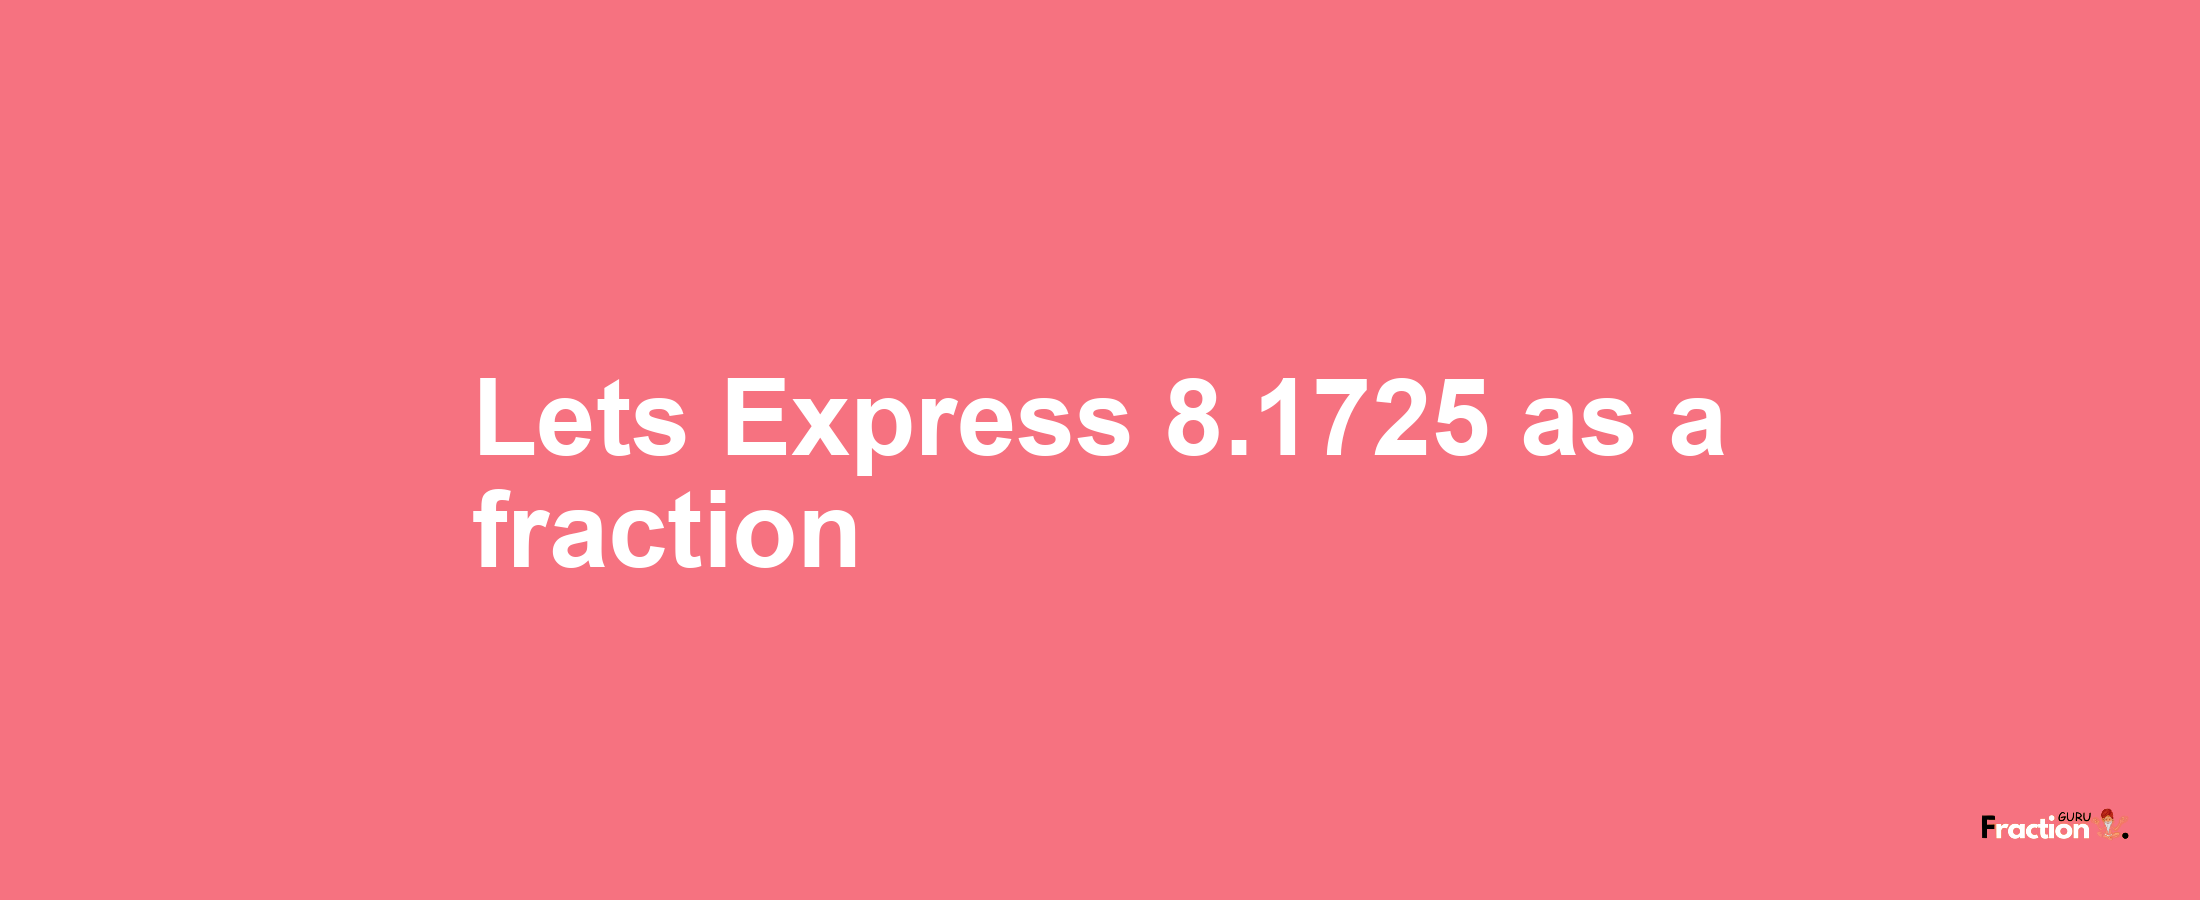 Lets Express 8.1725 as afraction